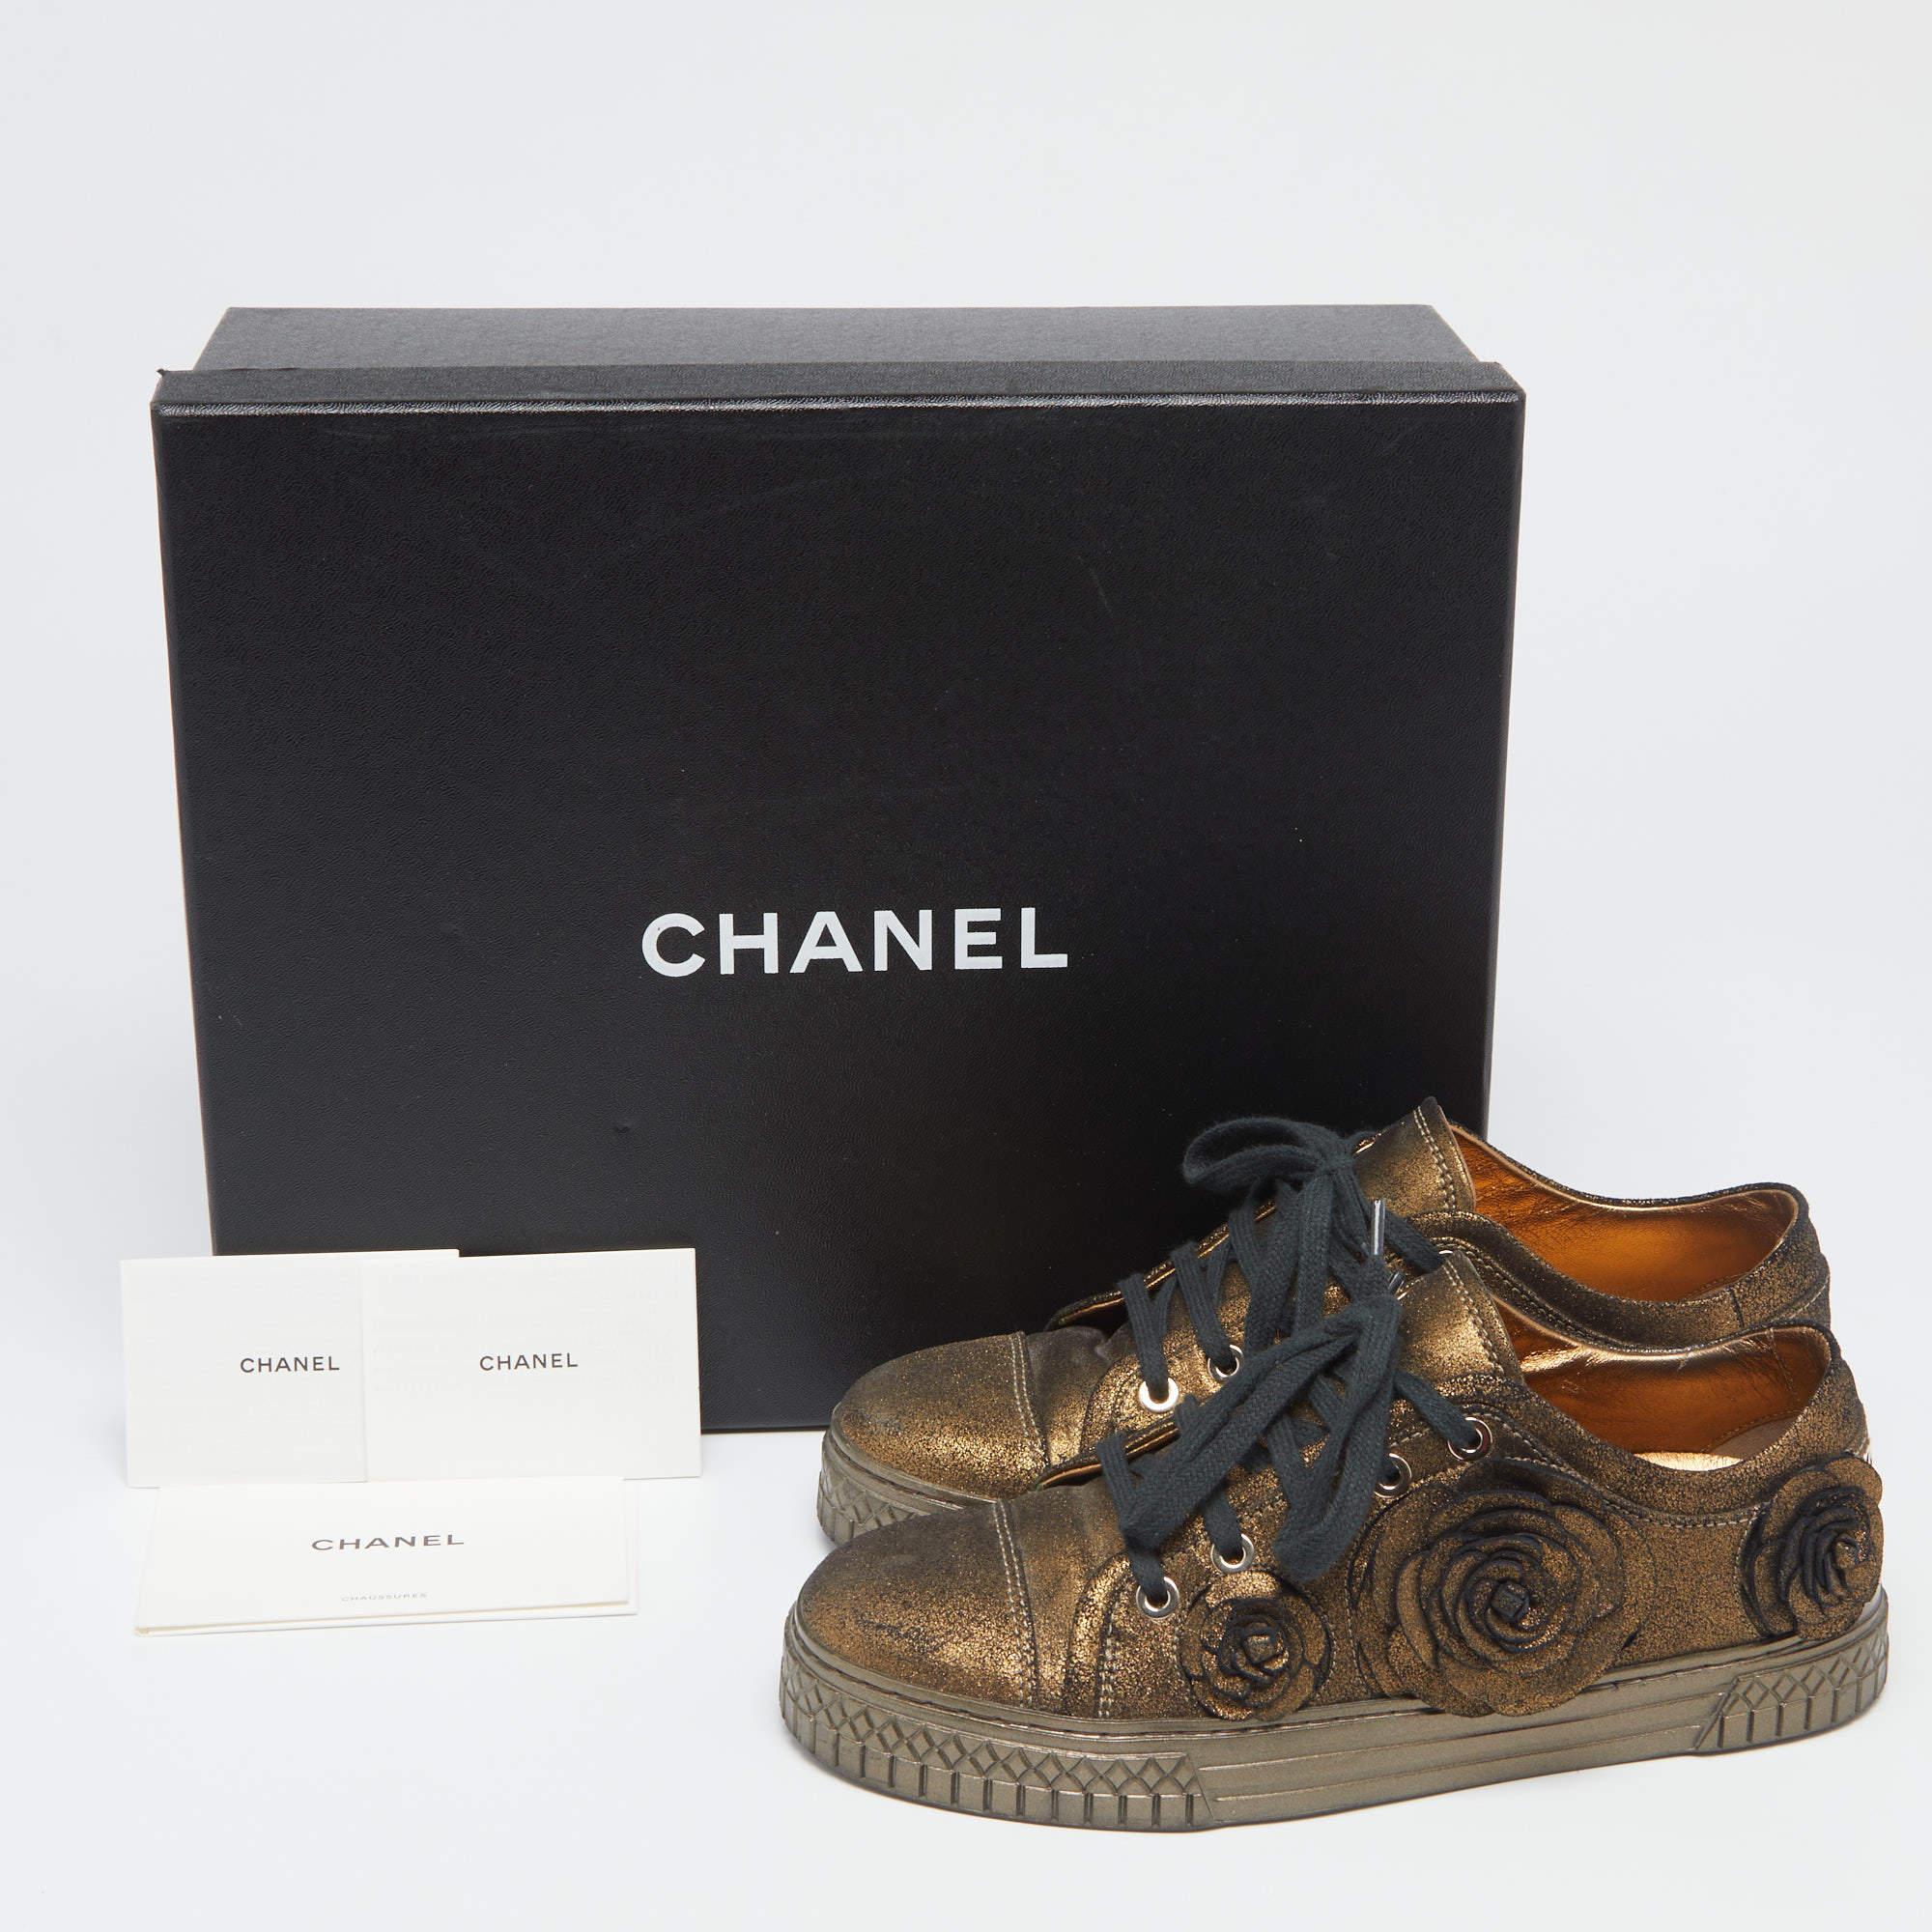 Chanel Metallic Bronze Nubuck Leather Camellia Lace Up Sneakers Size 35 5